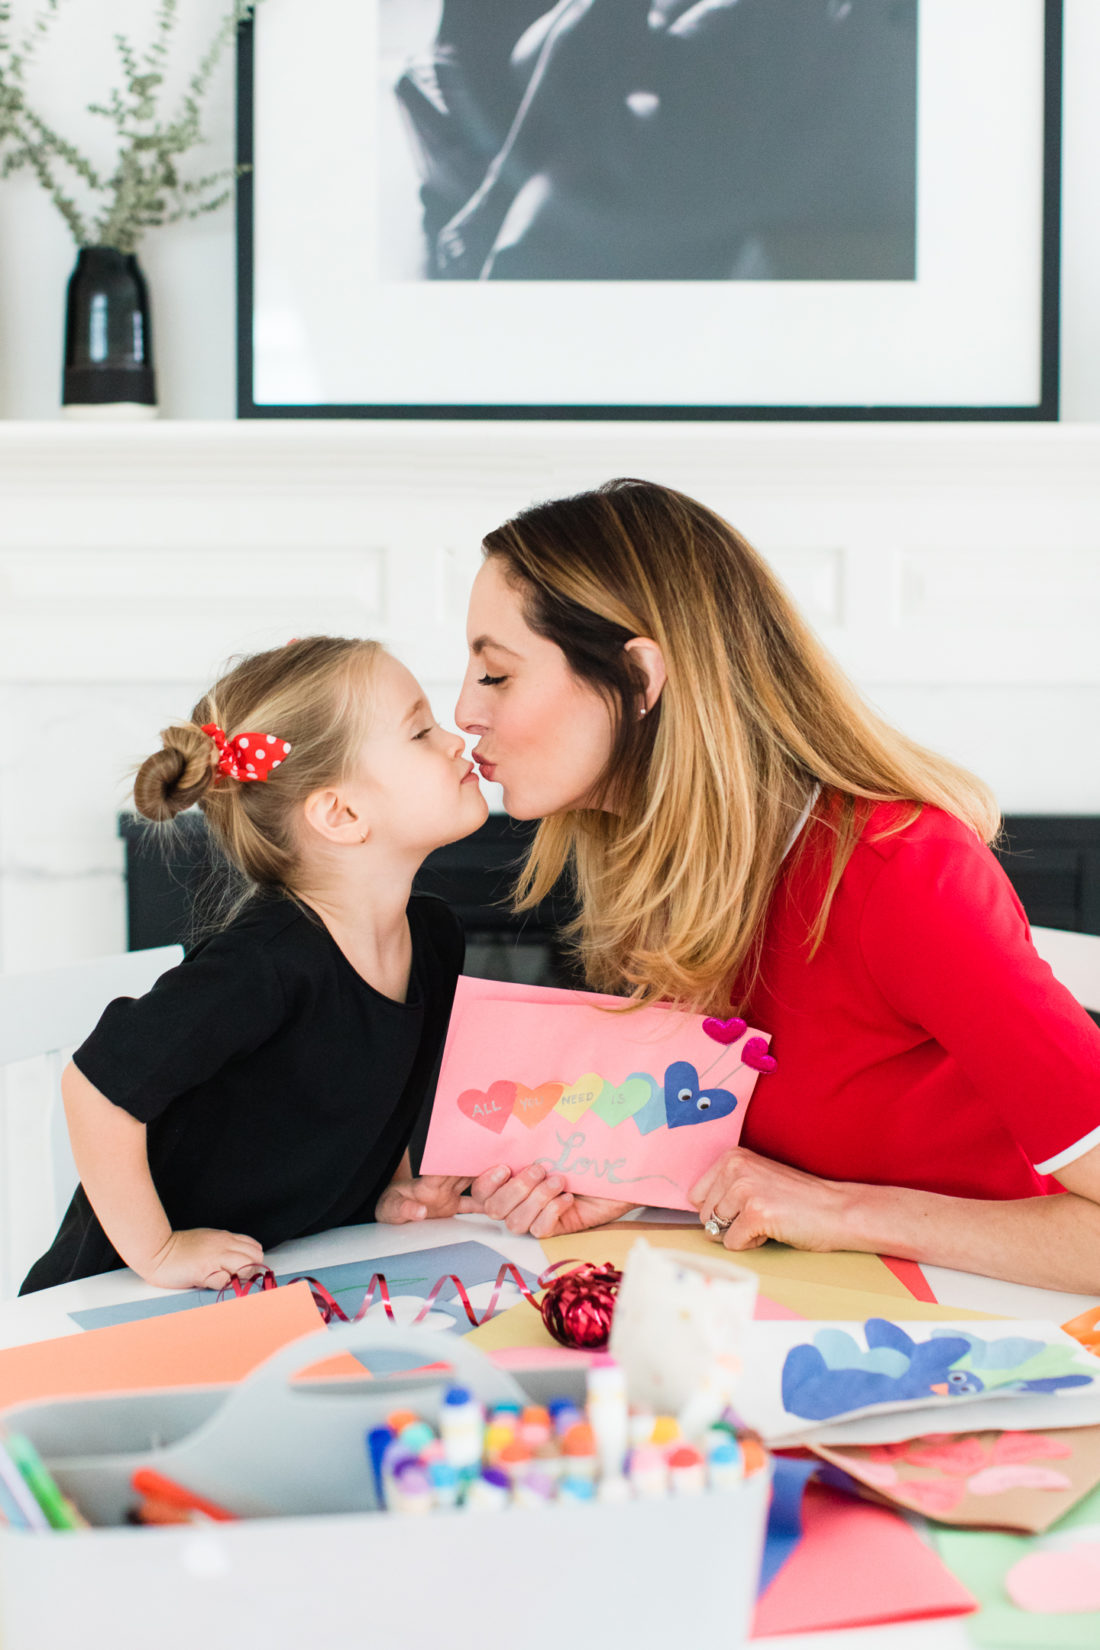 Eva AMurri Martino kisses three year old daughter Marlowe while they make Valentine's Day cards together